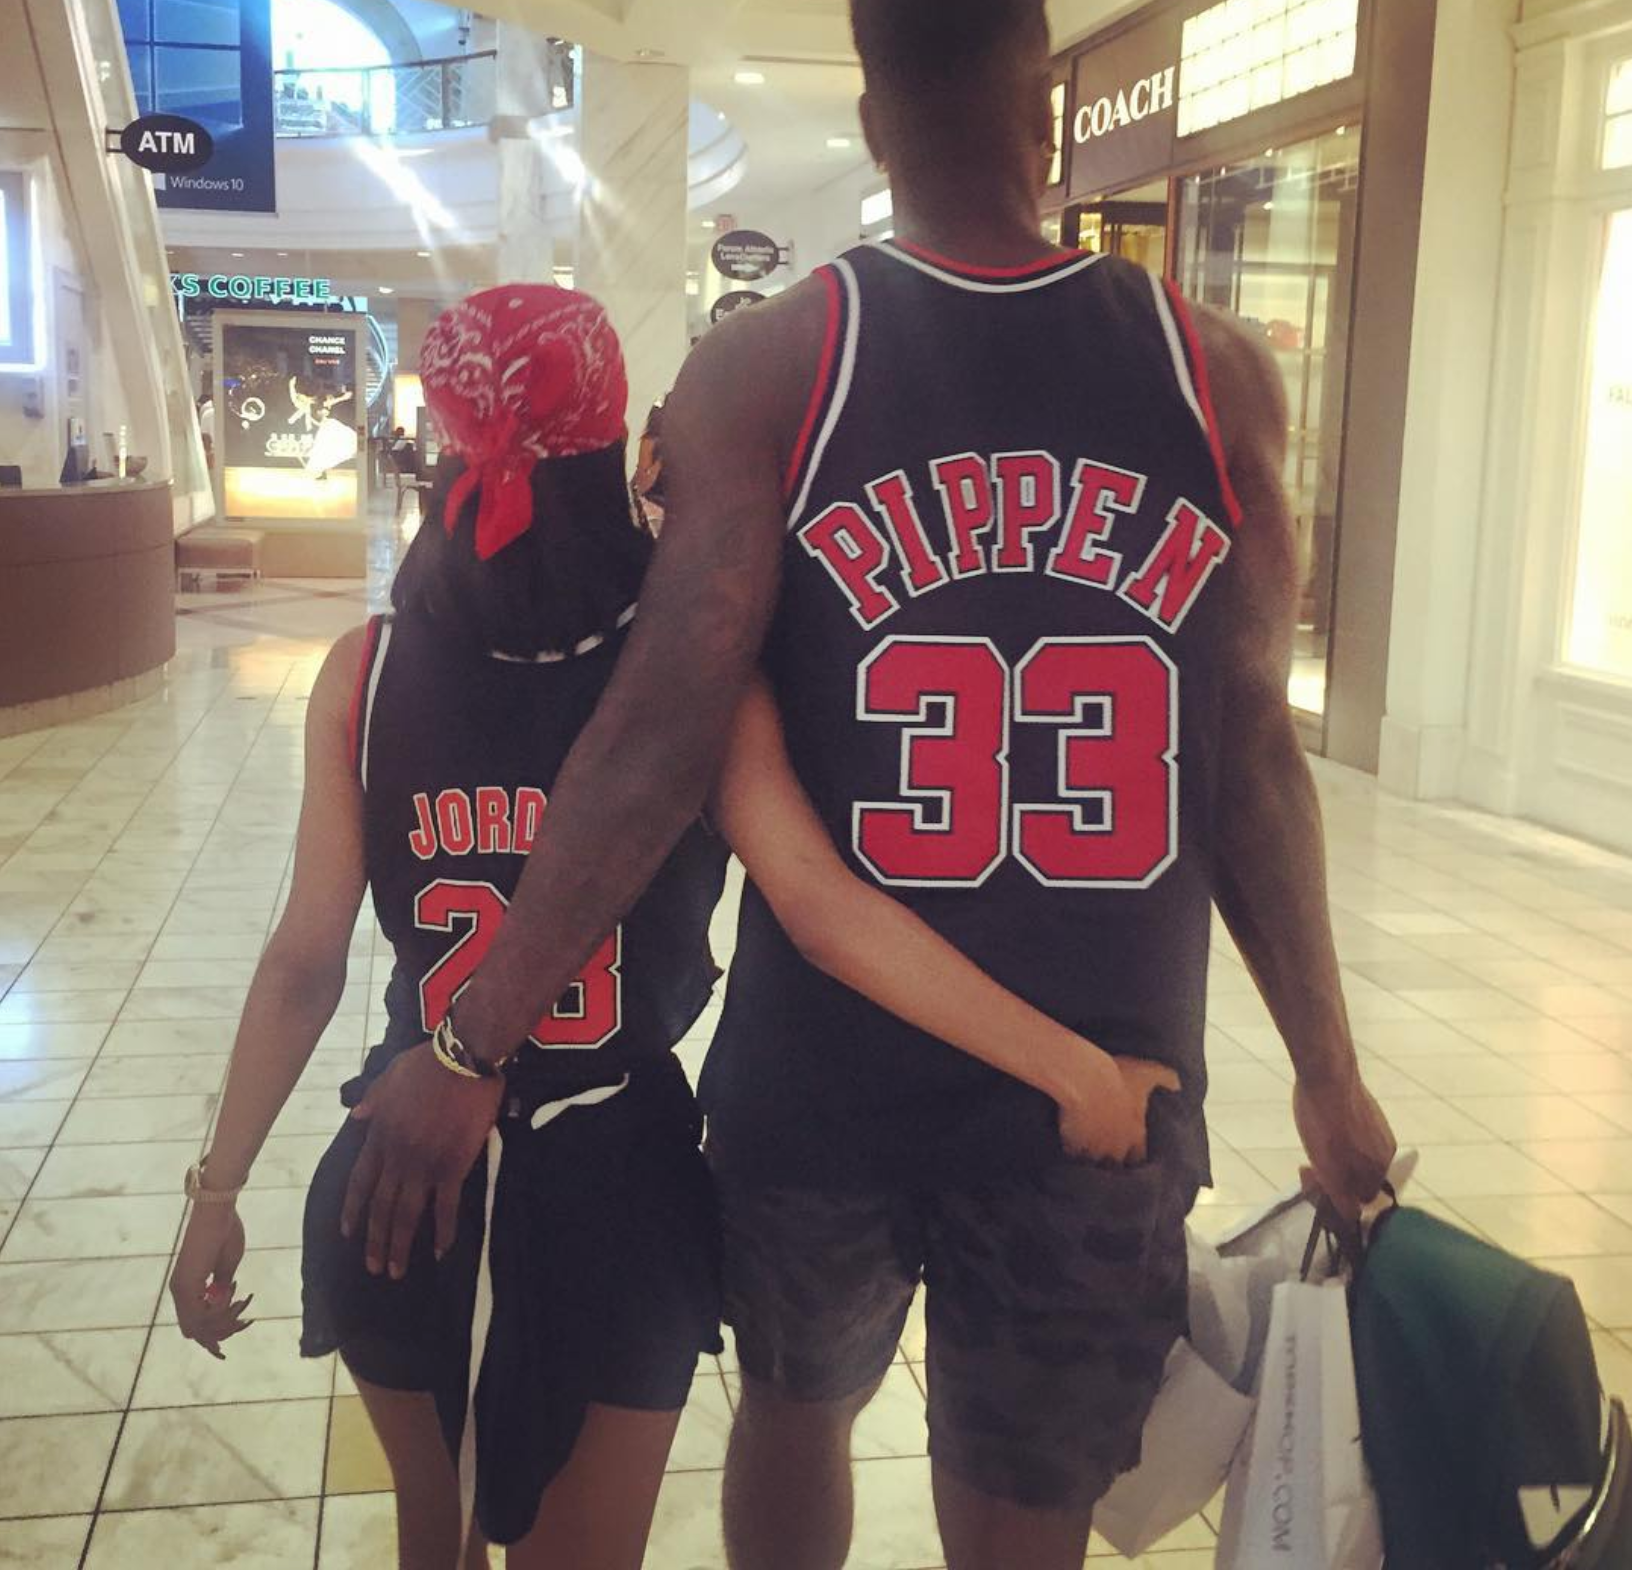 Teyana Taylor and Iman Shumpert's Love Story In Photos